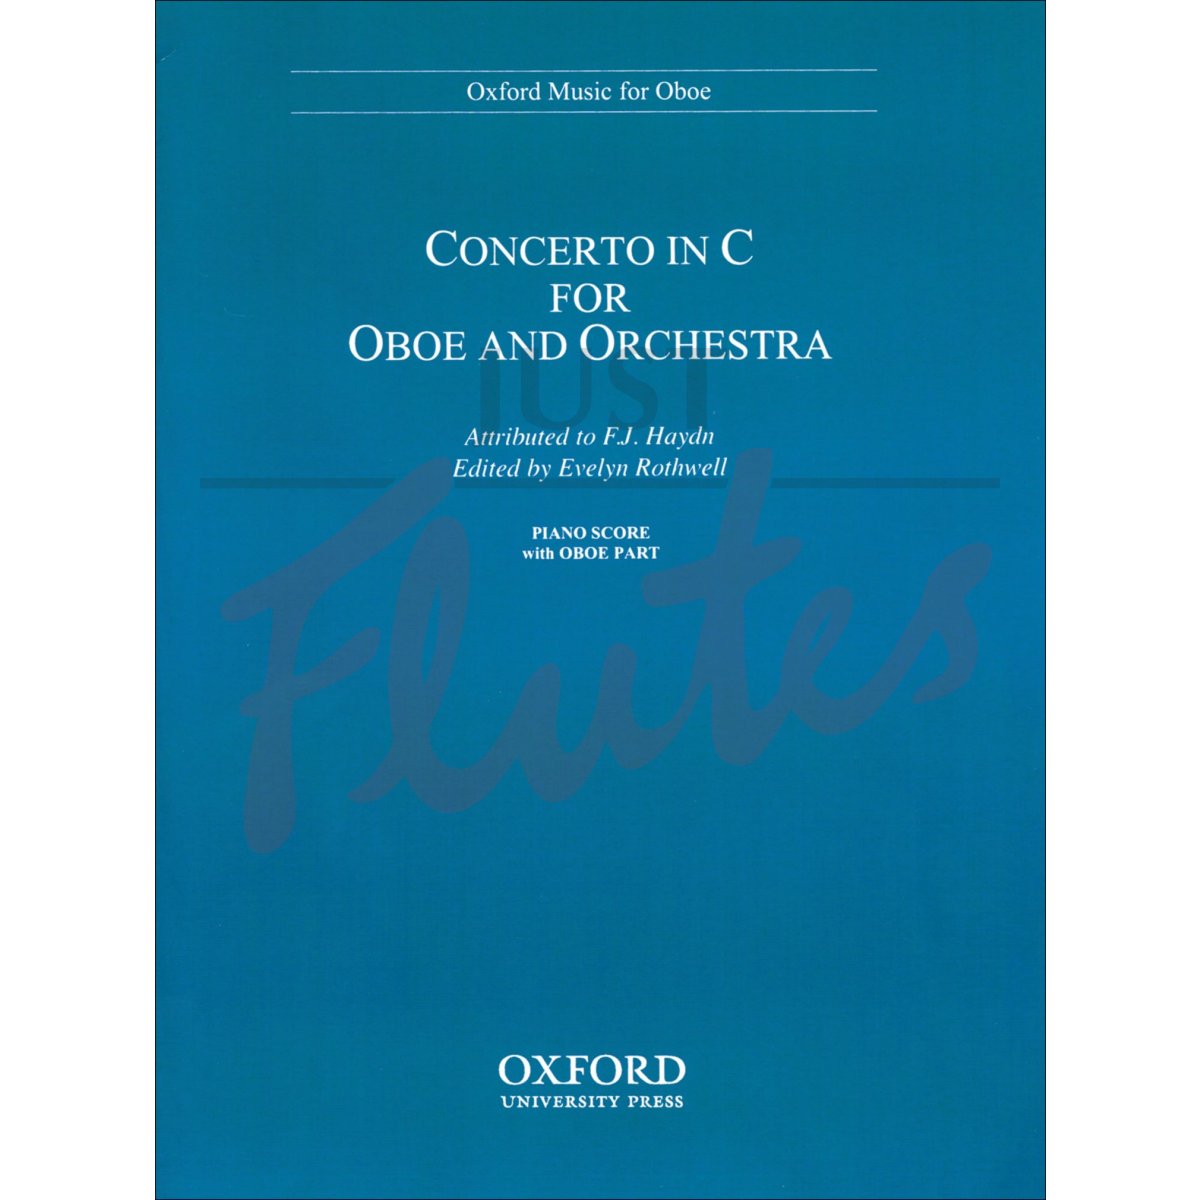 Concerto in C for Oboe and Orchestra (piano reduction)